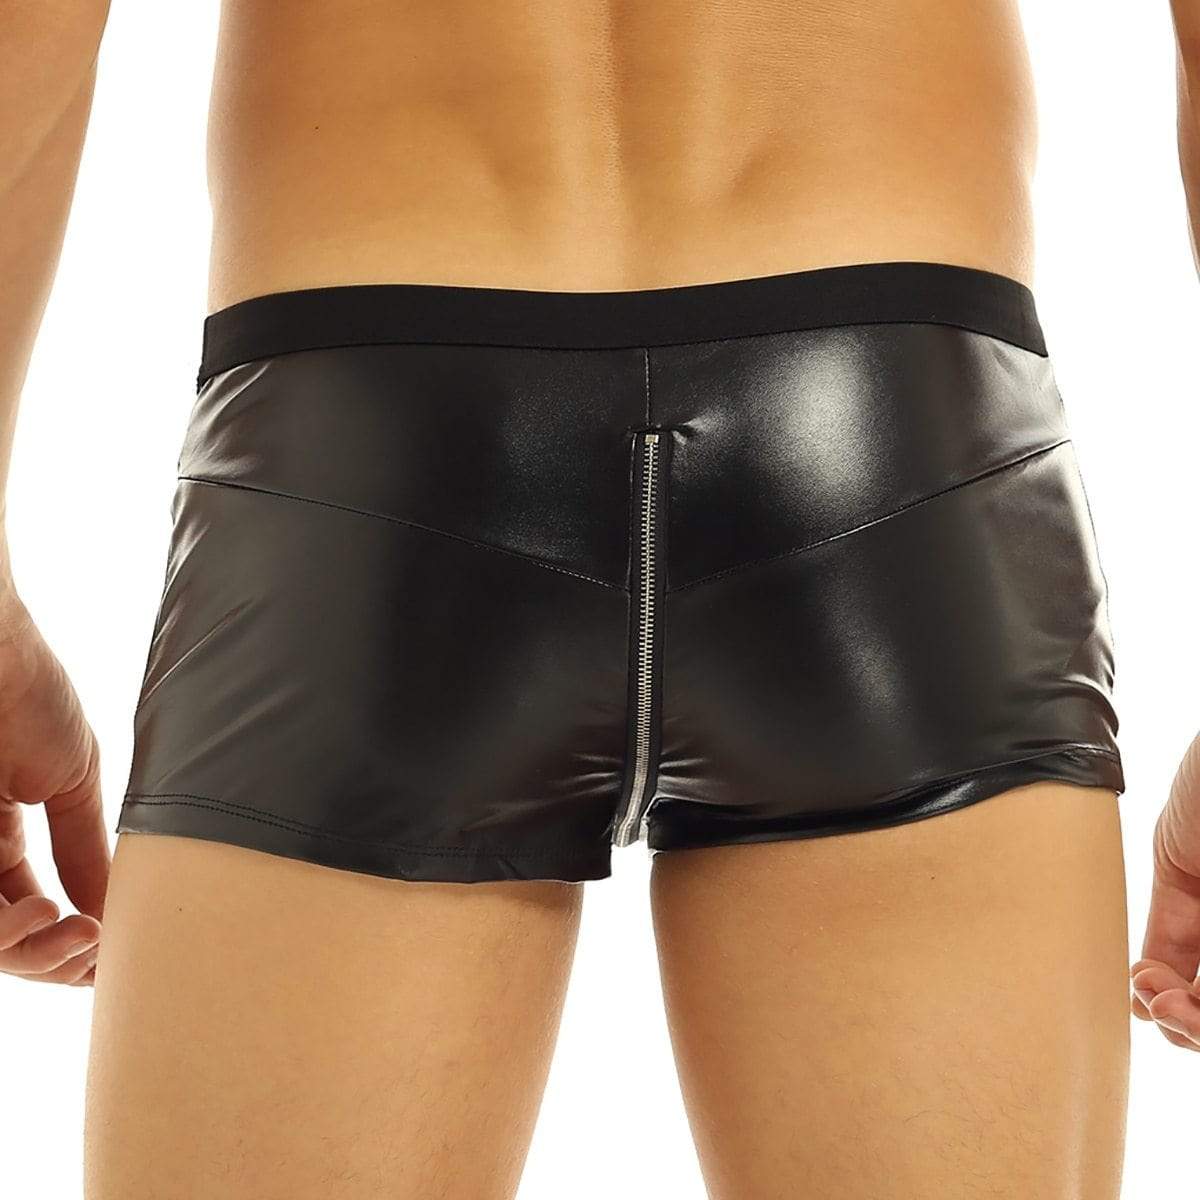 Faux Leather Zipper Boxer Shorts Black Wetlook Zip Fitted Underwear Kinky Cloth 7908